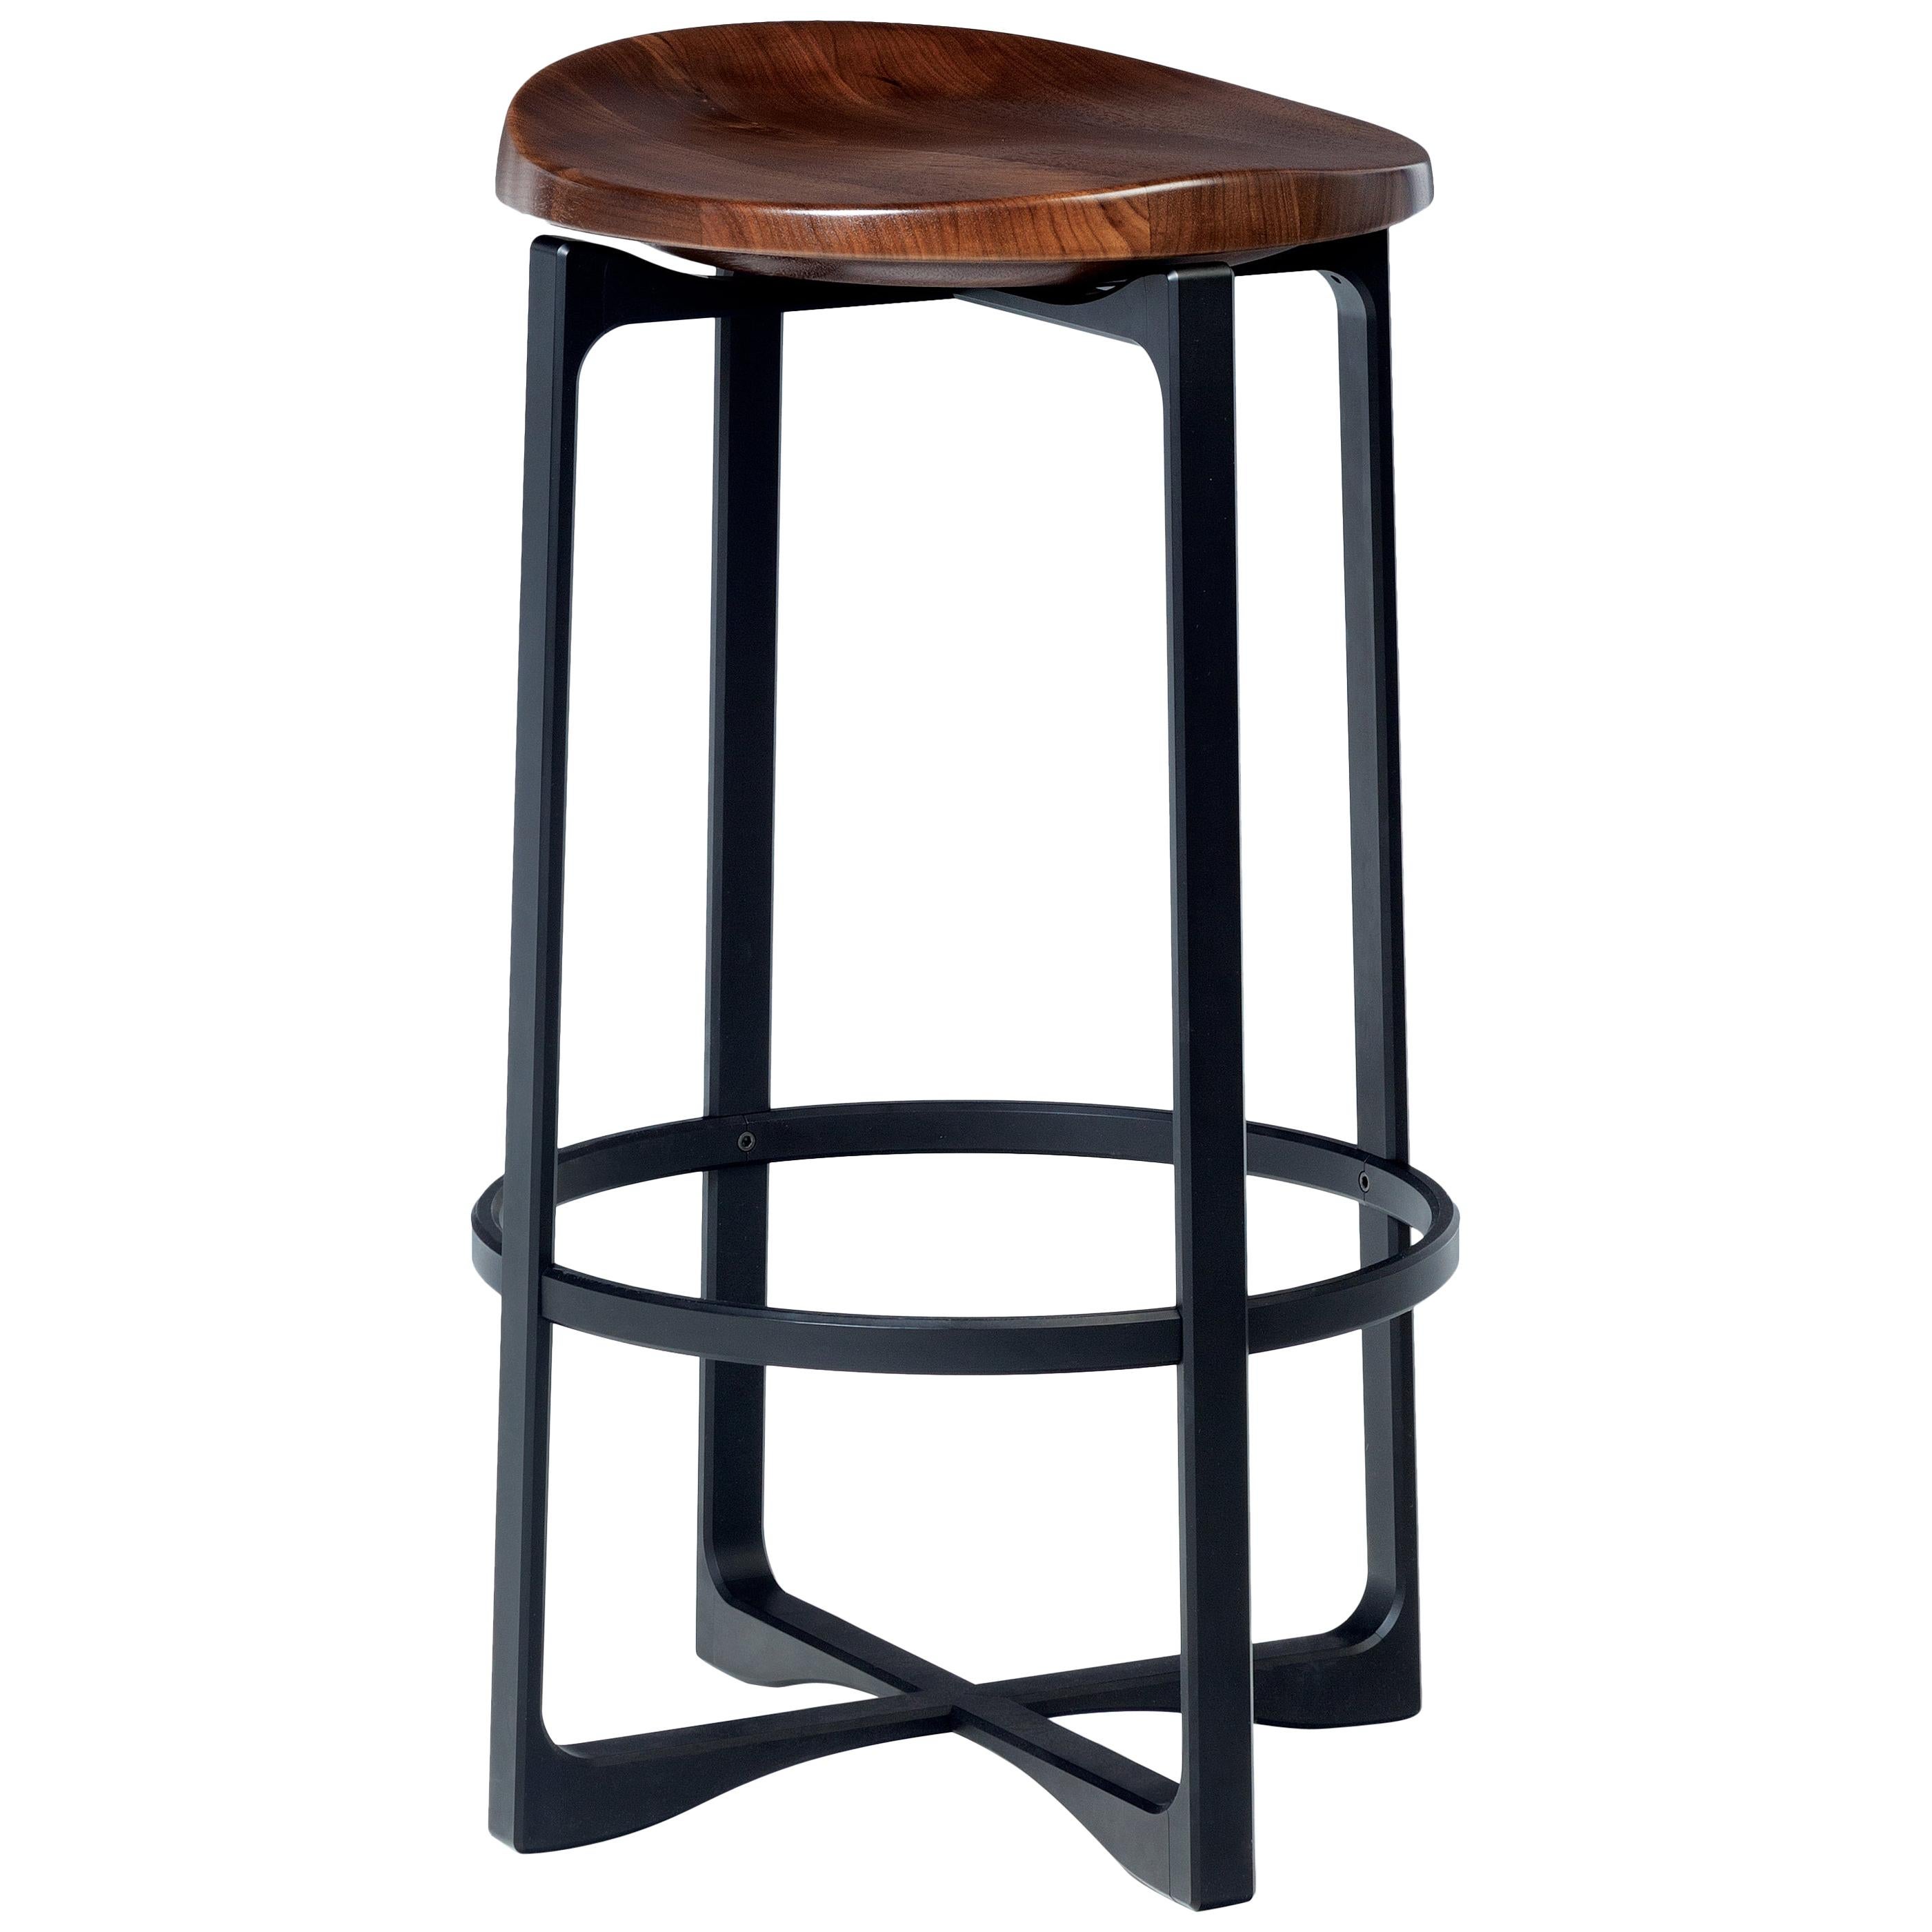 HOLLY HUNT Pepper Bar Stool with Walnut Cinder Seat and Aluminum Frame